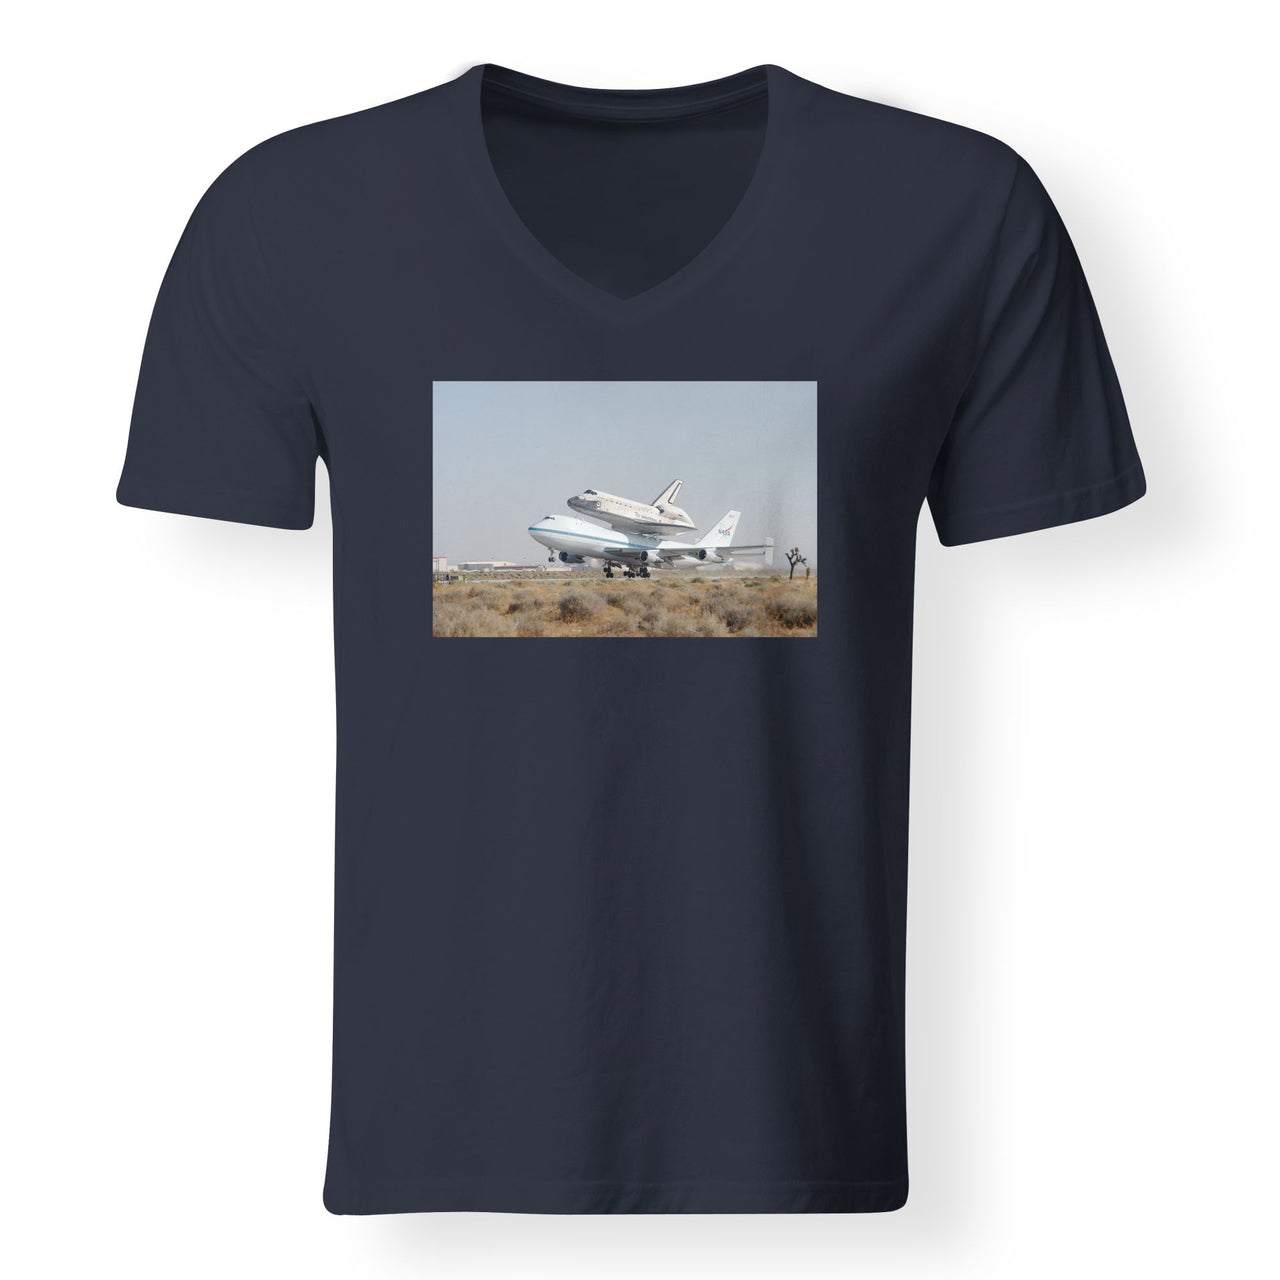 Boeing 747 Carrying Nasa's Space Shuttle Designed V-Neck T-Shirts